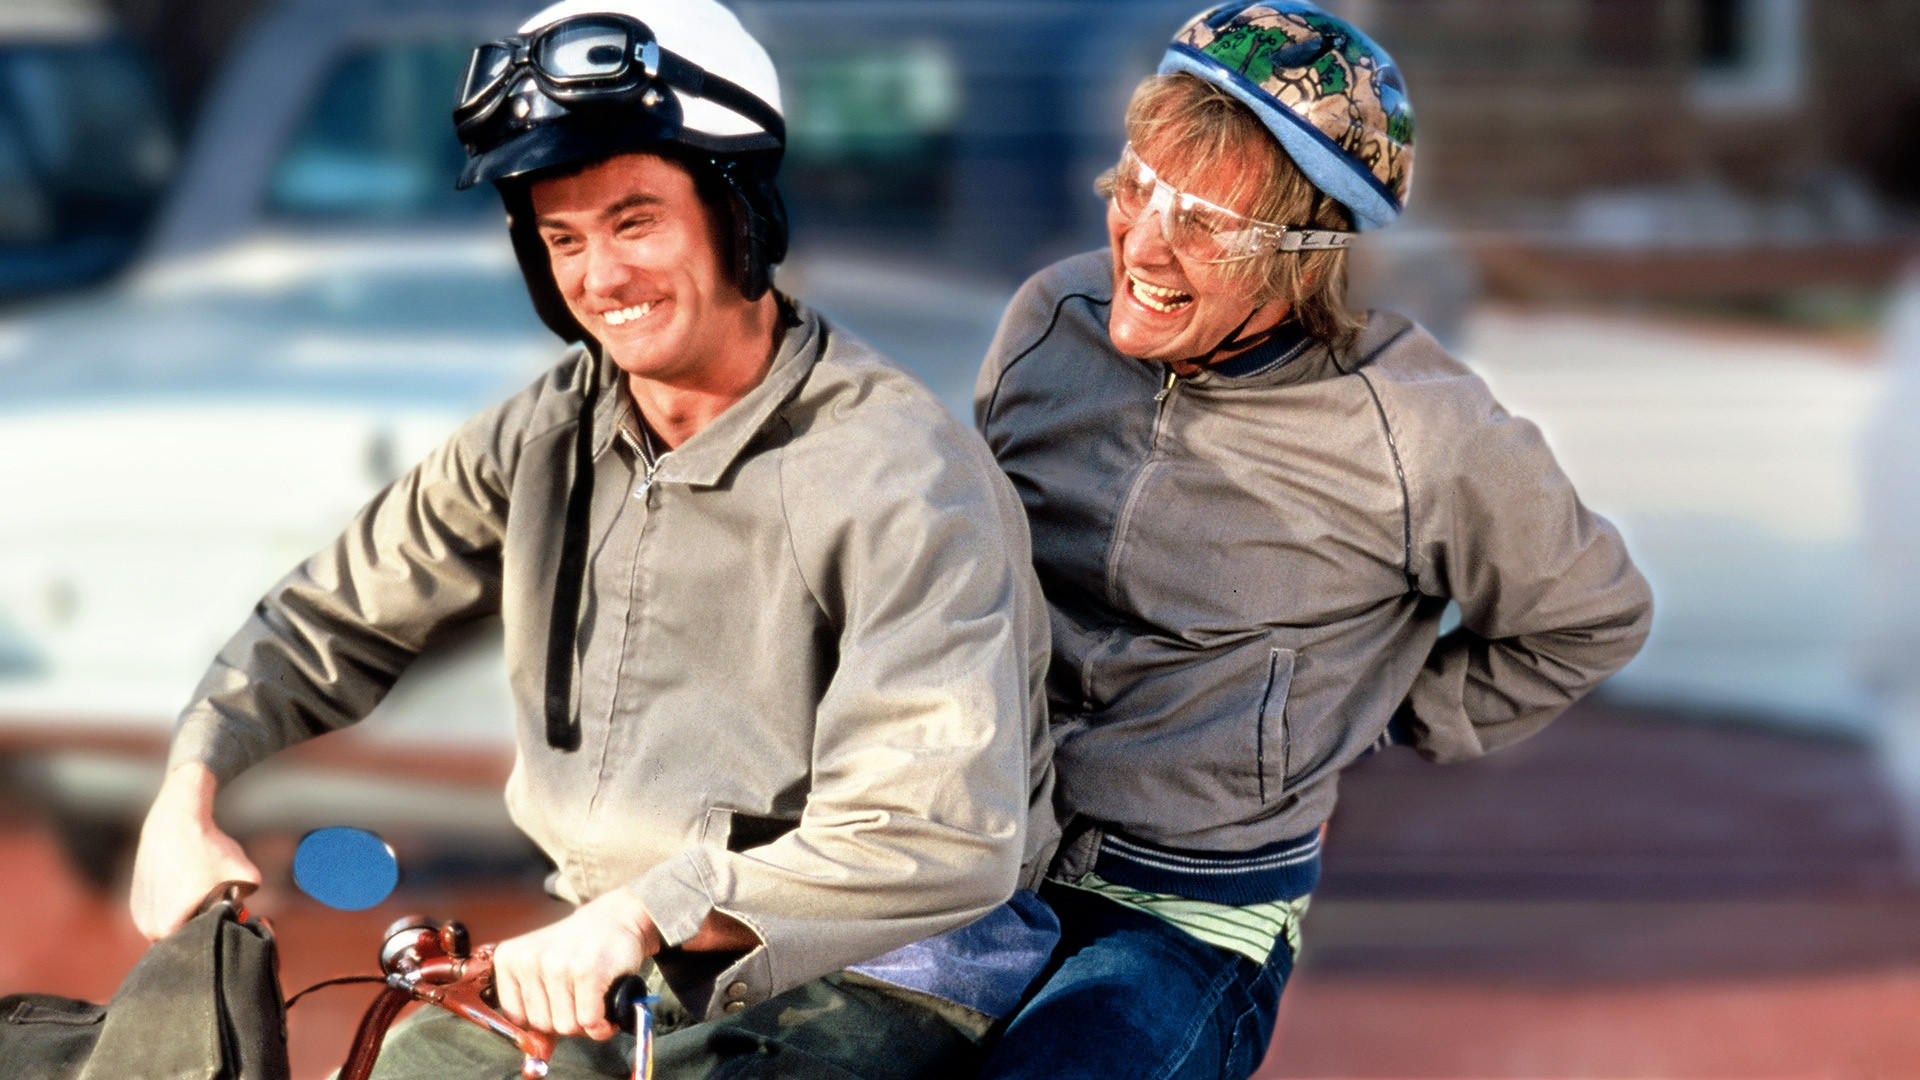 Jim Carrey and Jeff Daniels play the titular roles in "Dumb and Dumber".